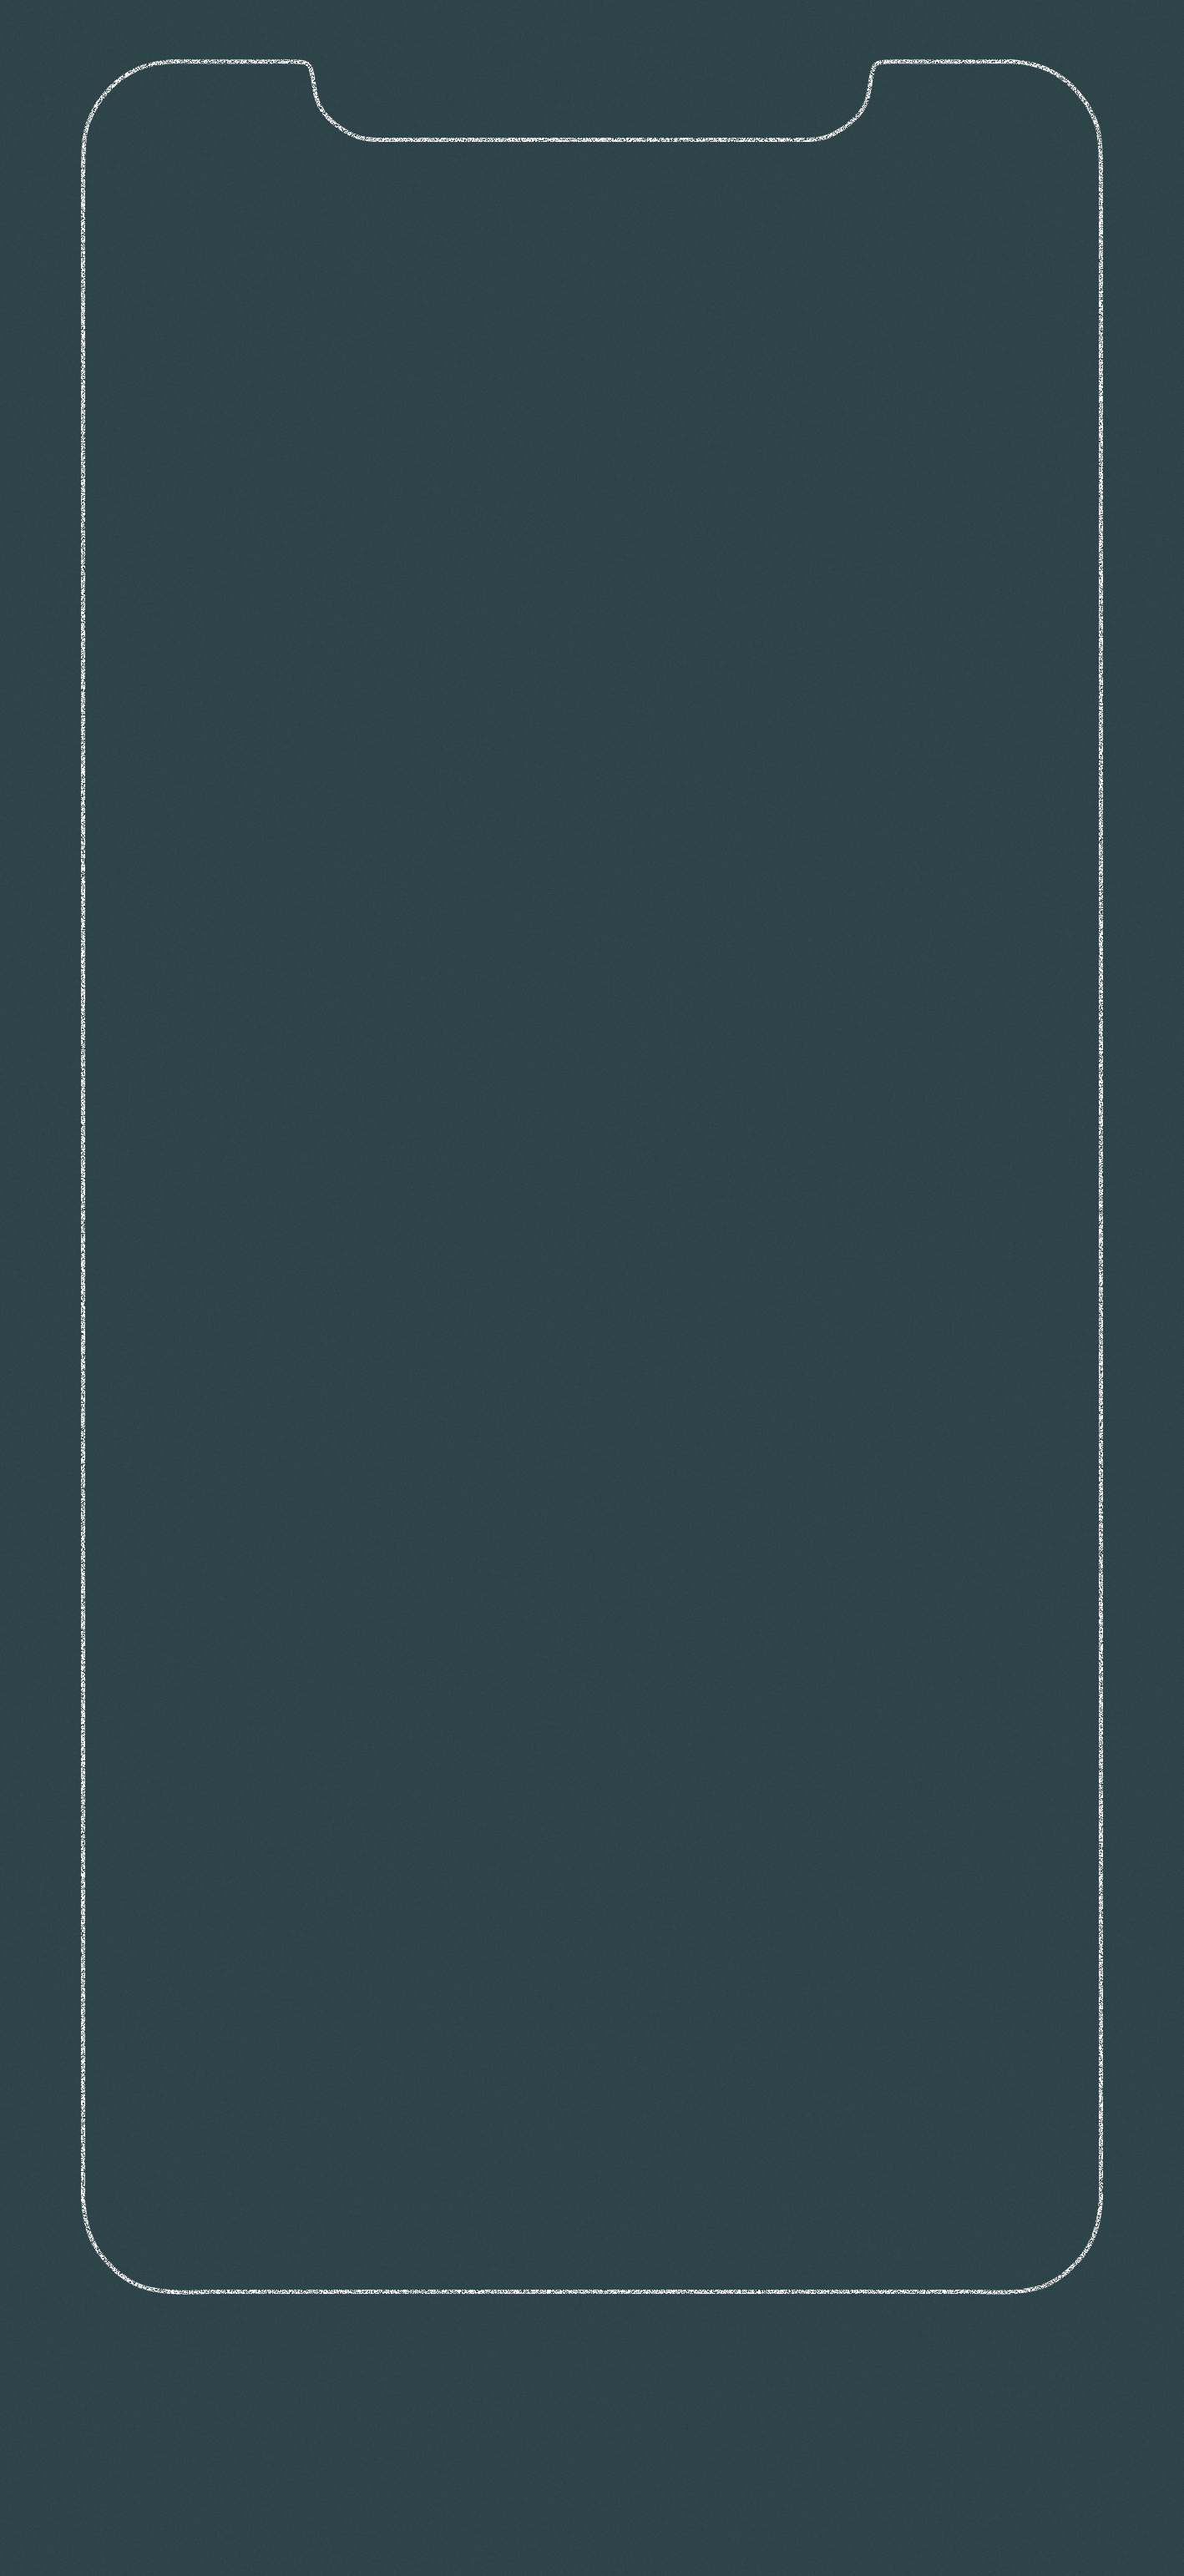 iPhone XS Max Outline Wallpaper. iPhone wallpaper image, iPhone homescreen wallpaper, Colourful wallpaper iphone